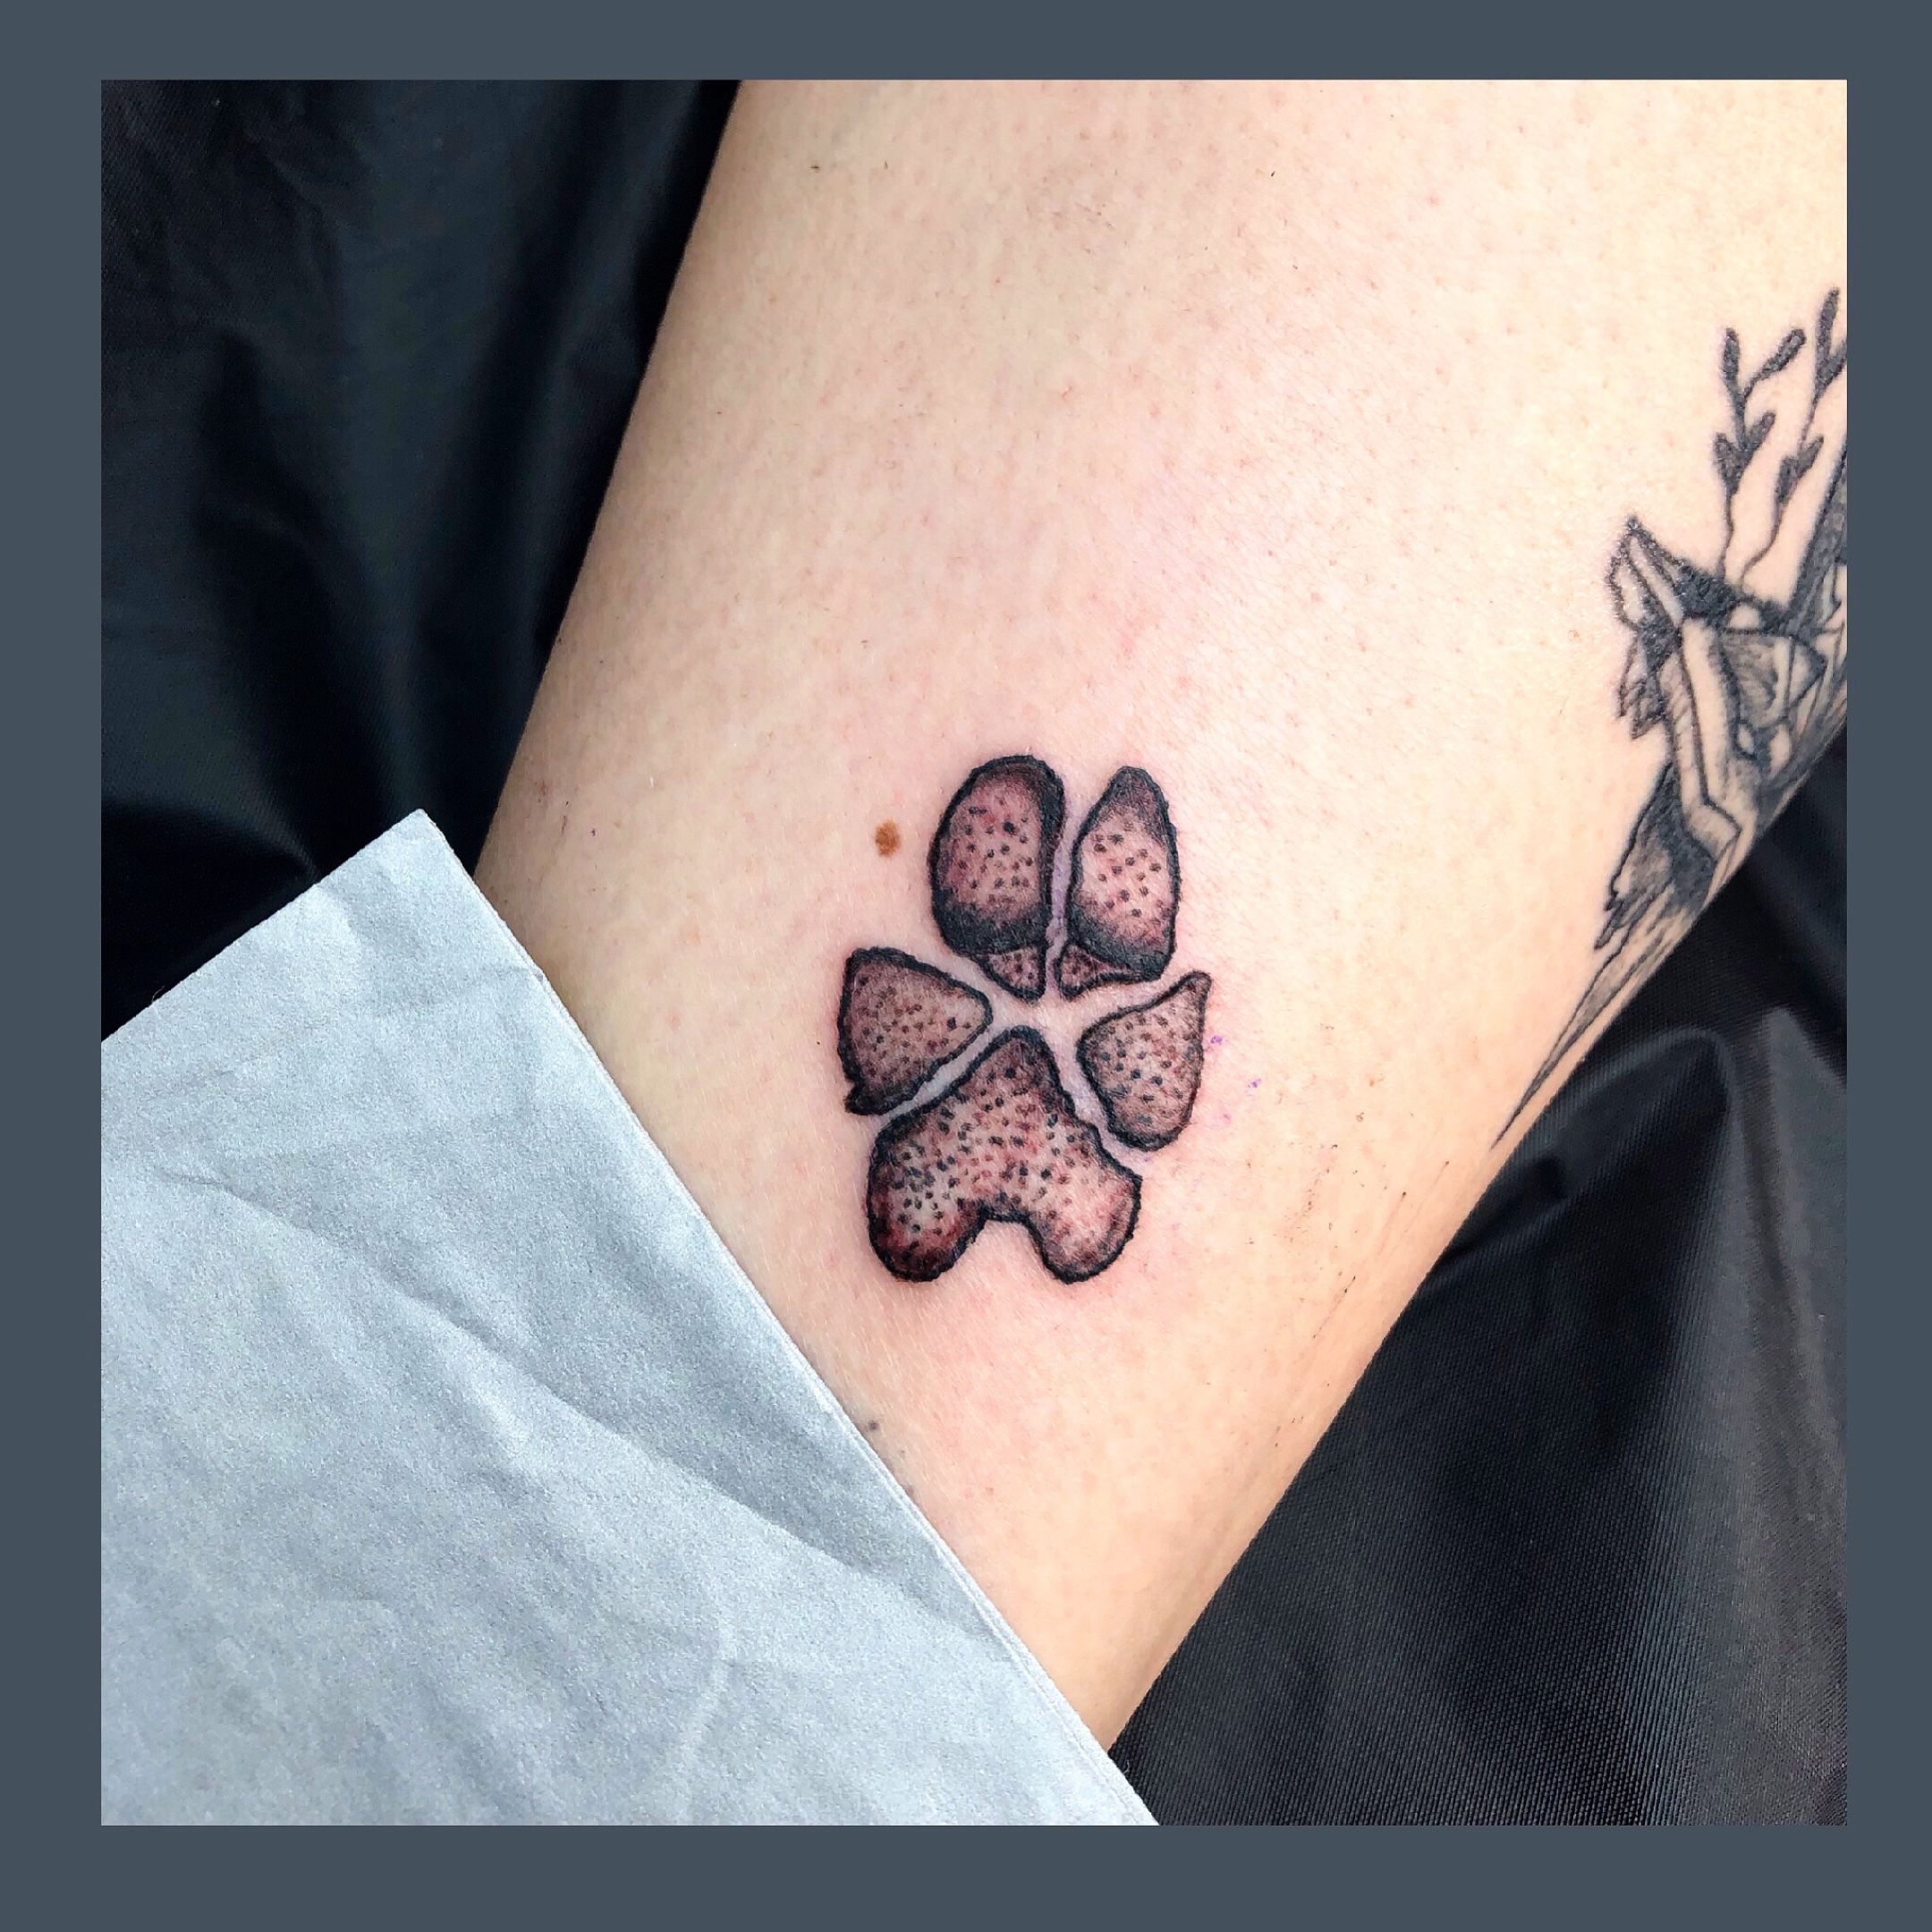 Forget Me Not Tattoos Symbolism Meanings  More